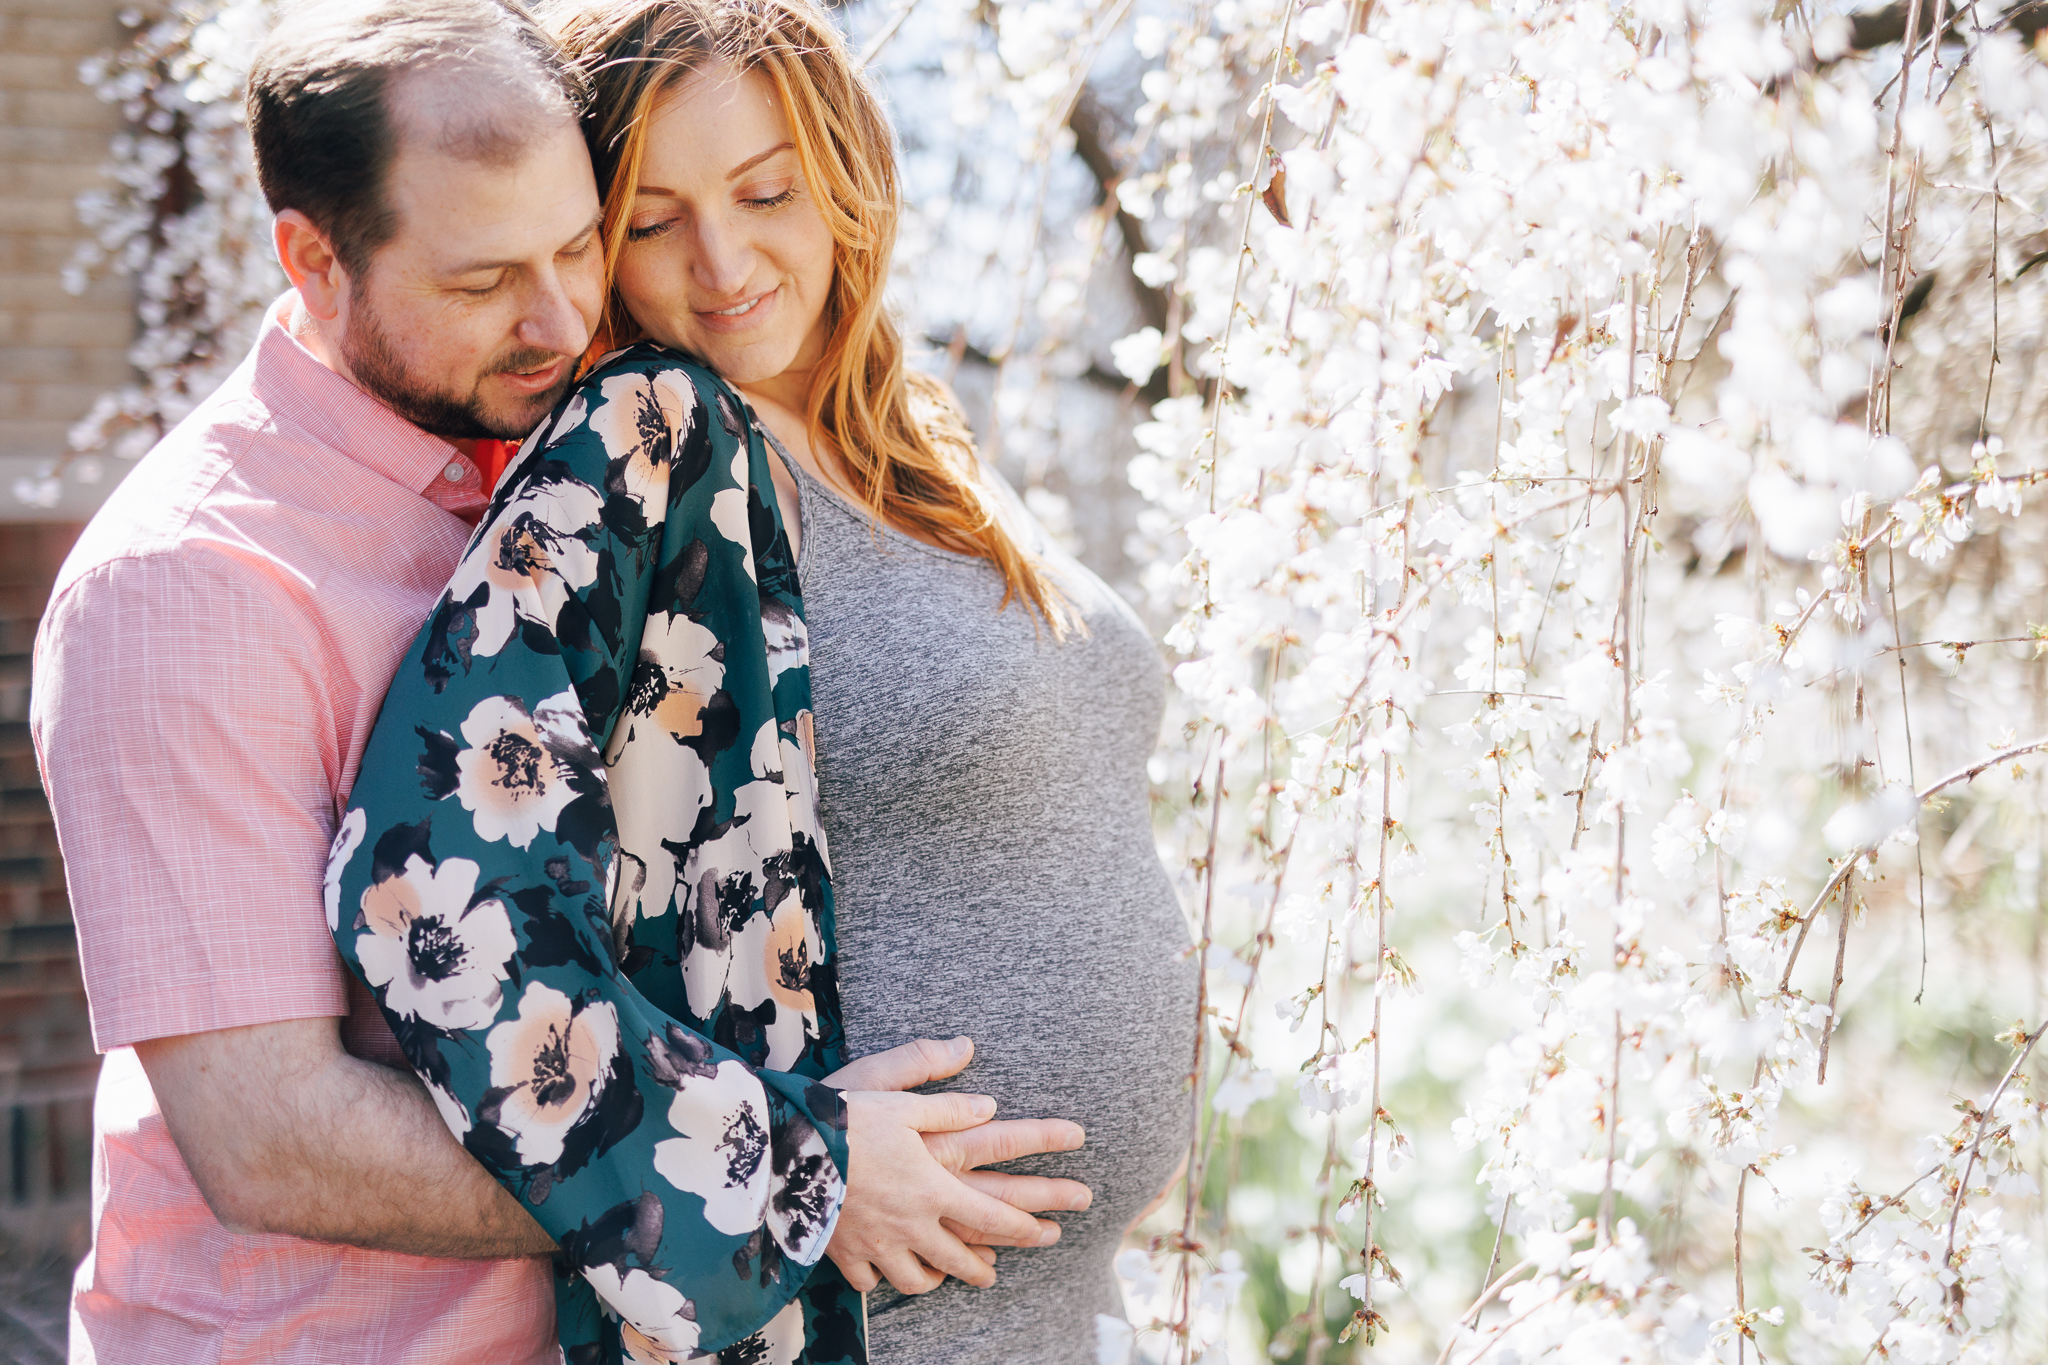 maternity photo shoot in the spring infront of cherry blossom tree.